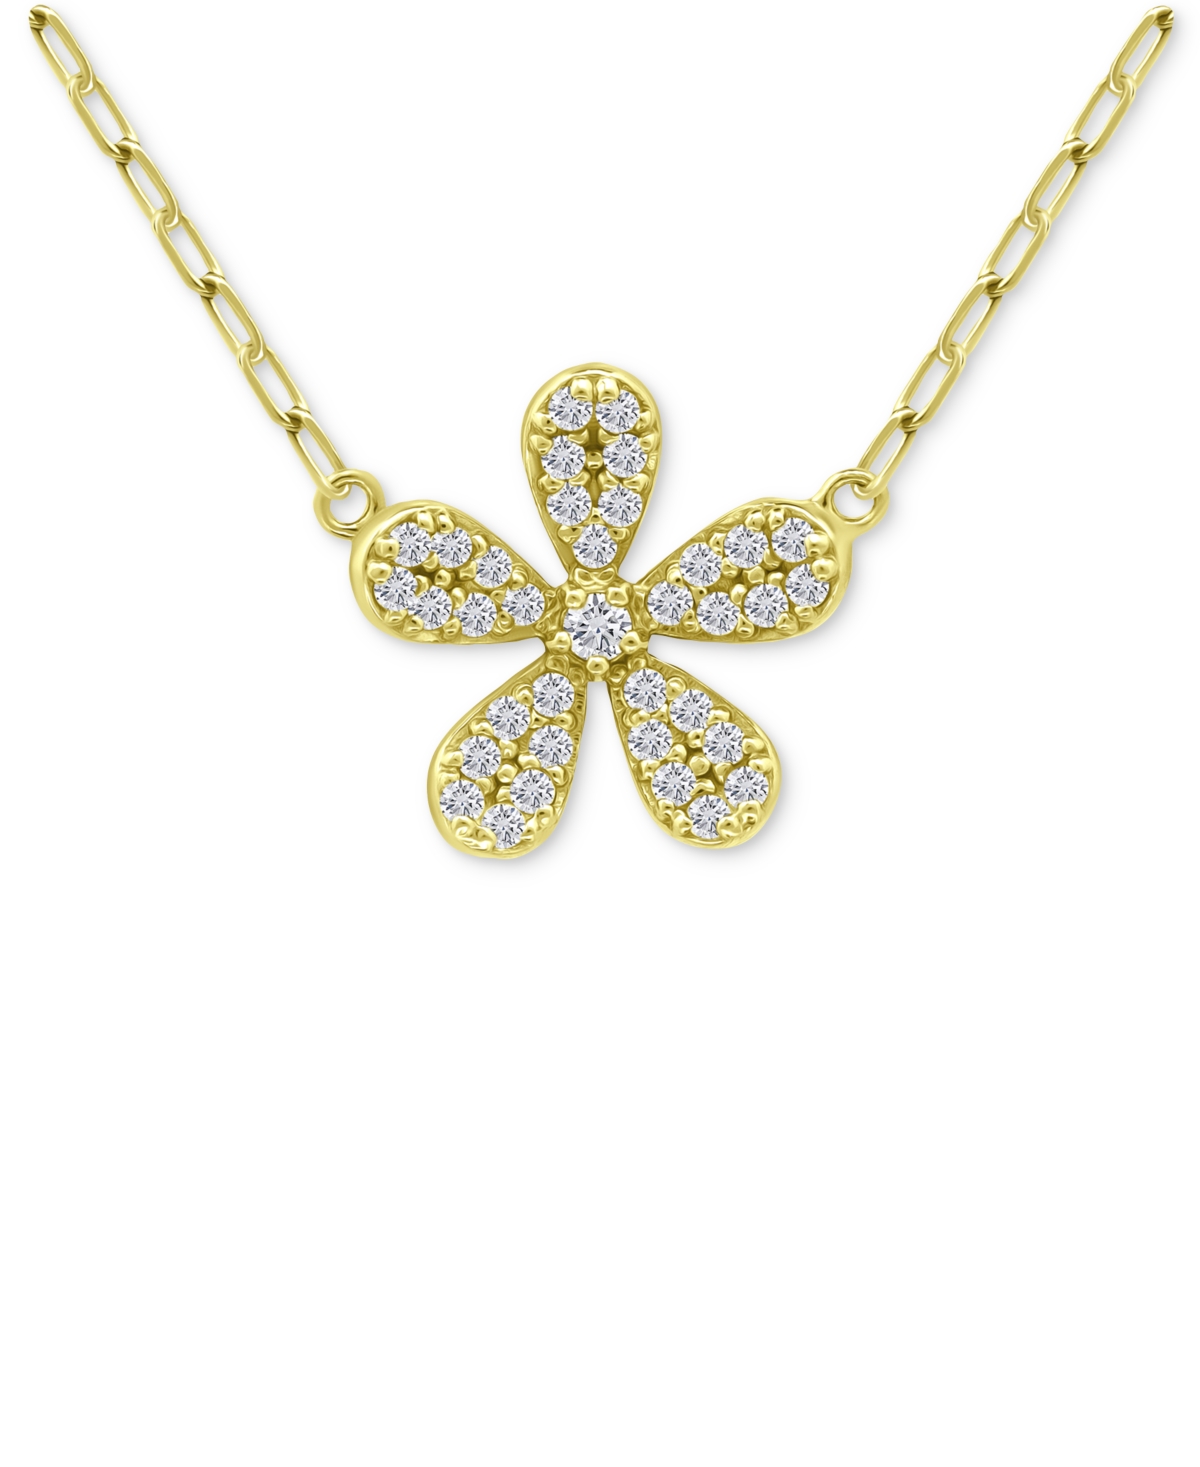 Giani Bernini Cubic Zirconia Flower Pendant Necklace In 18k Gold-plated Sterling Silver, 16" + 2" Extender, Create